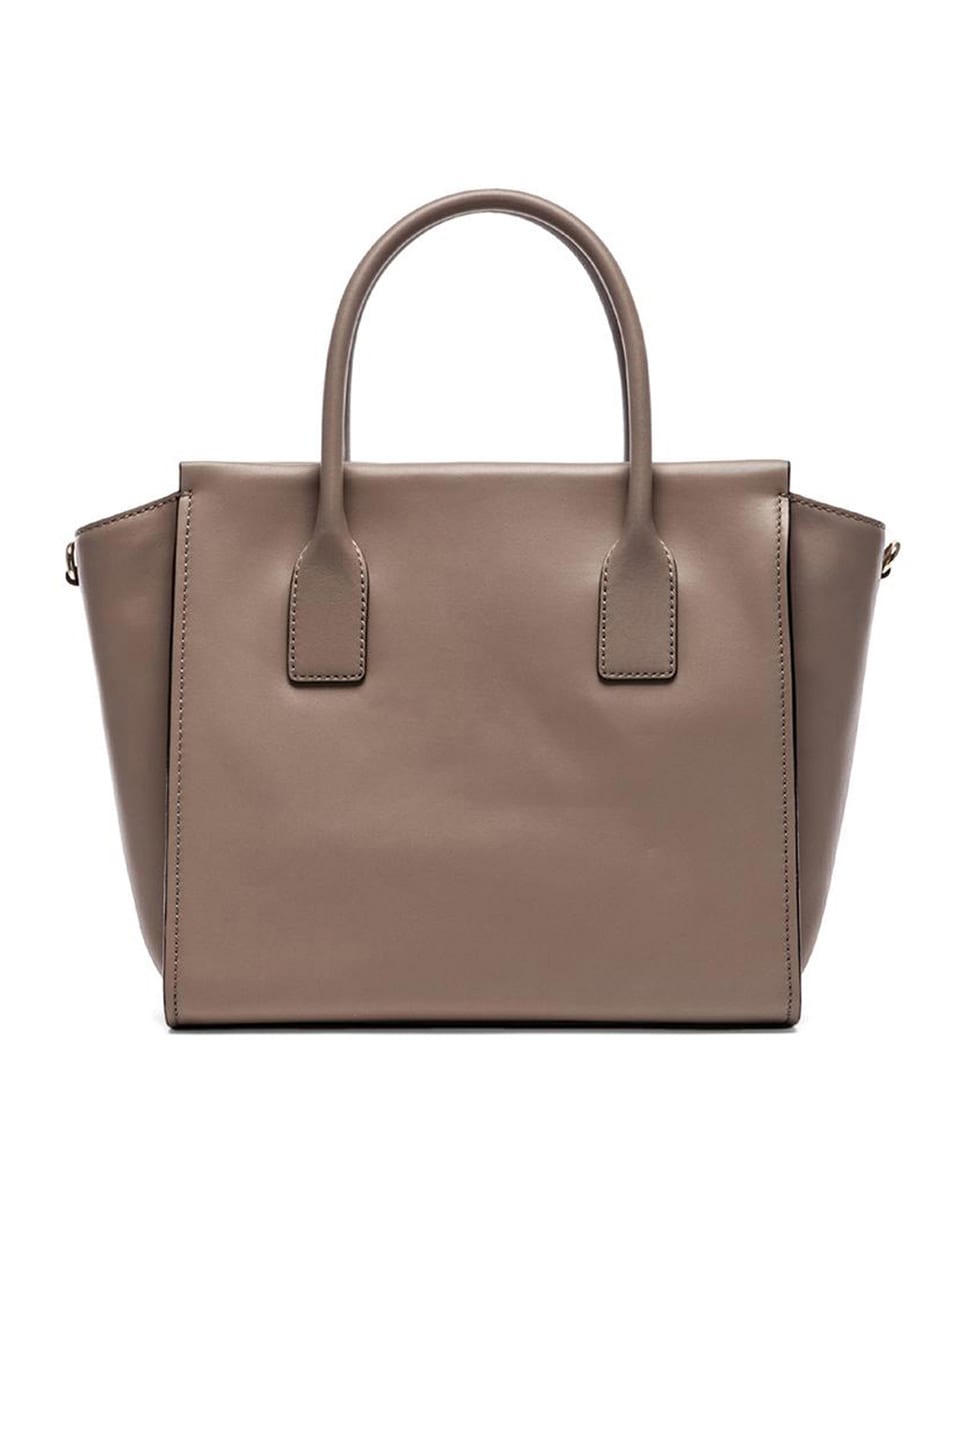 kate spade new york Charee Tote in Warm Putty  Black